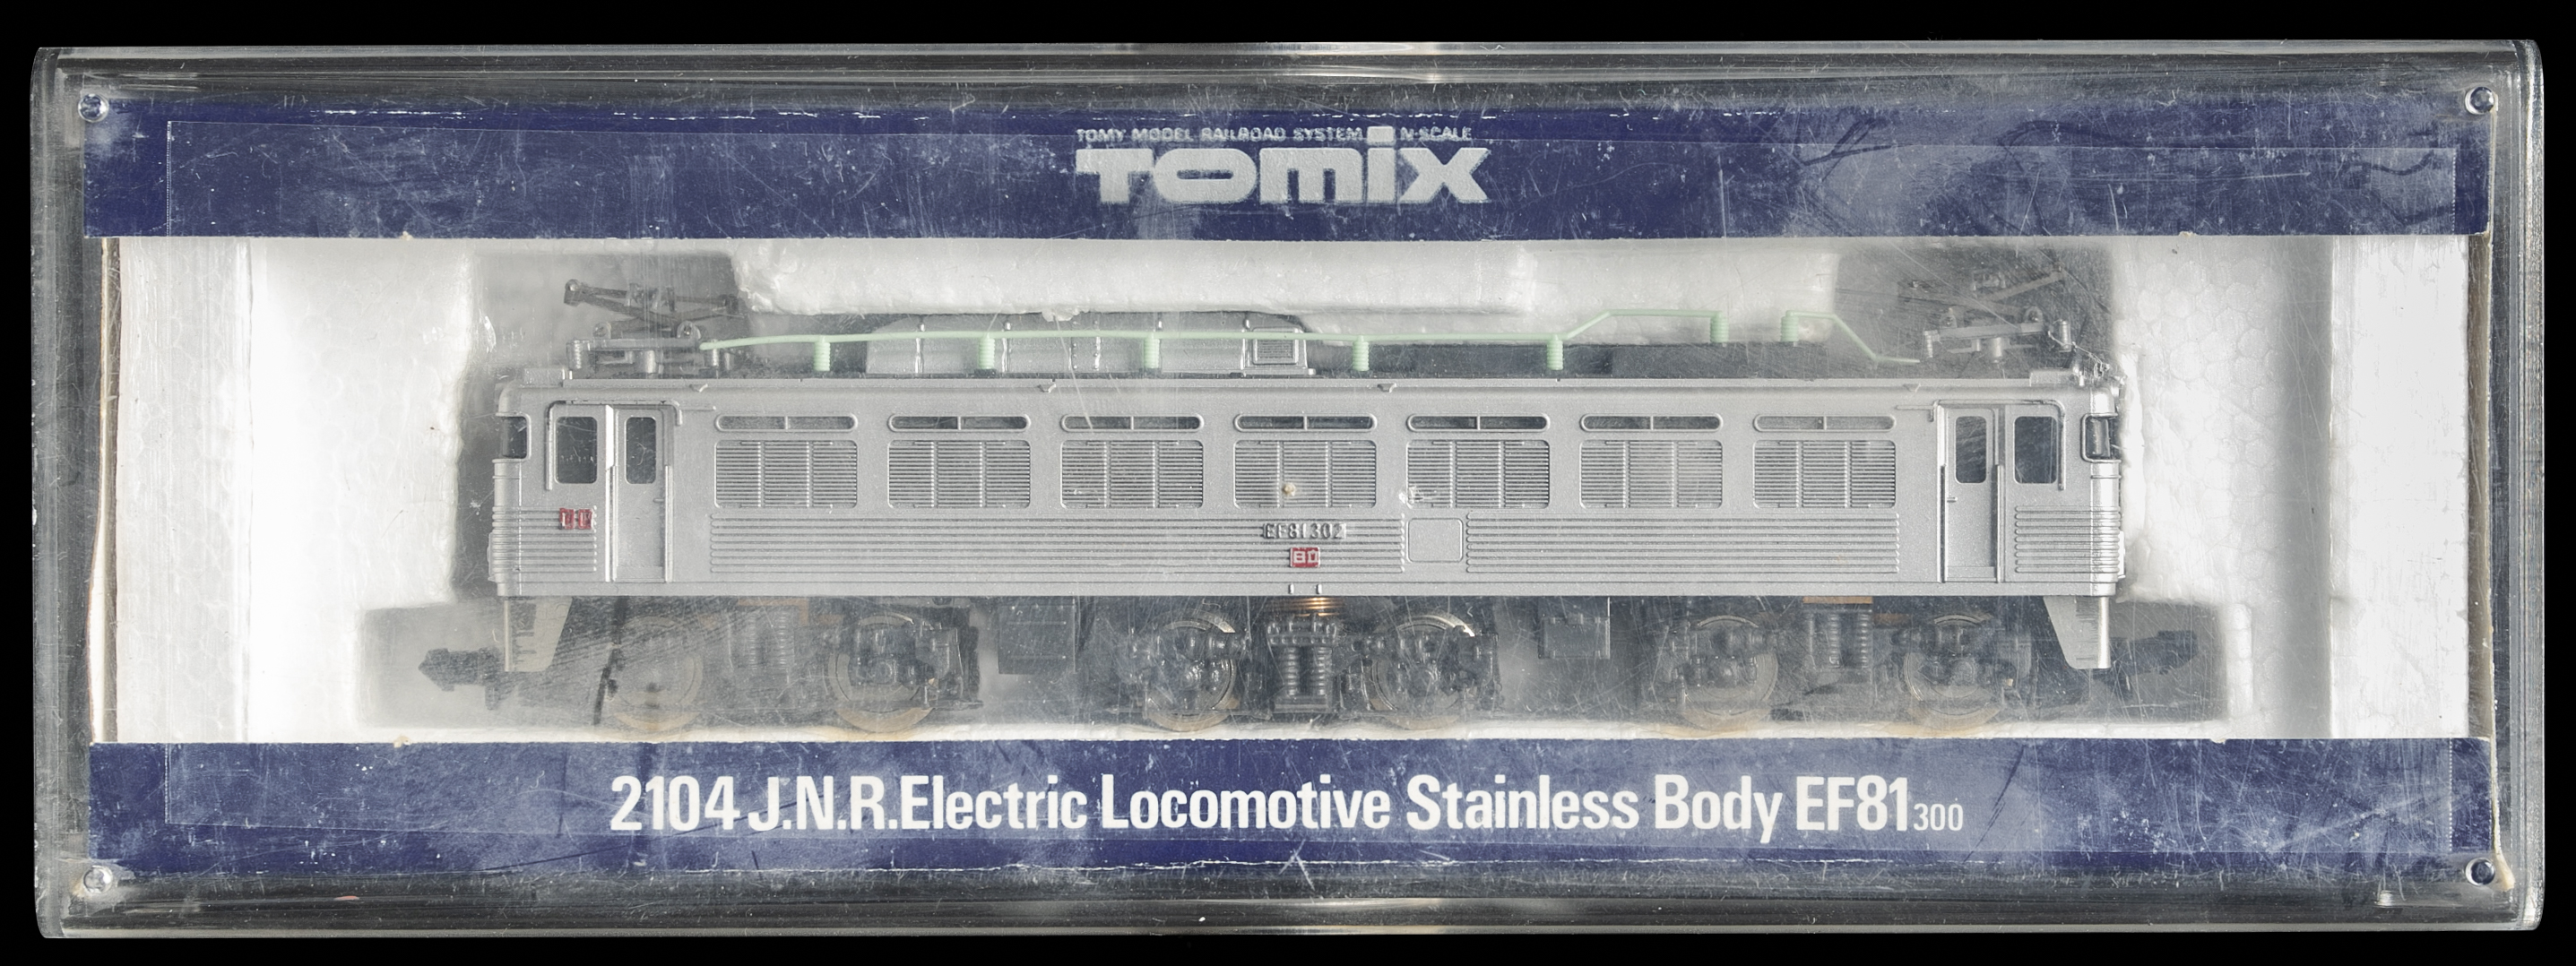 auction,［TOMIX］ N-SCALE 2104 J.N.R.Electric Locomotive Stainless 